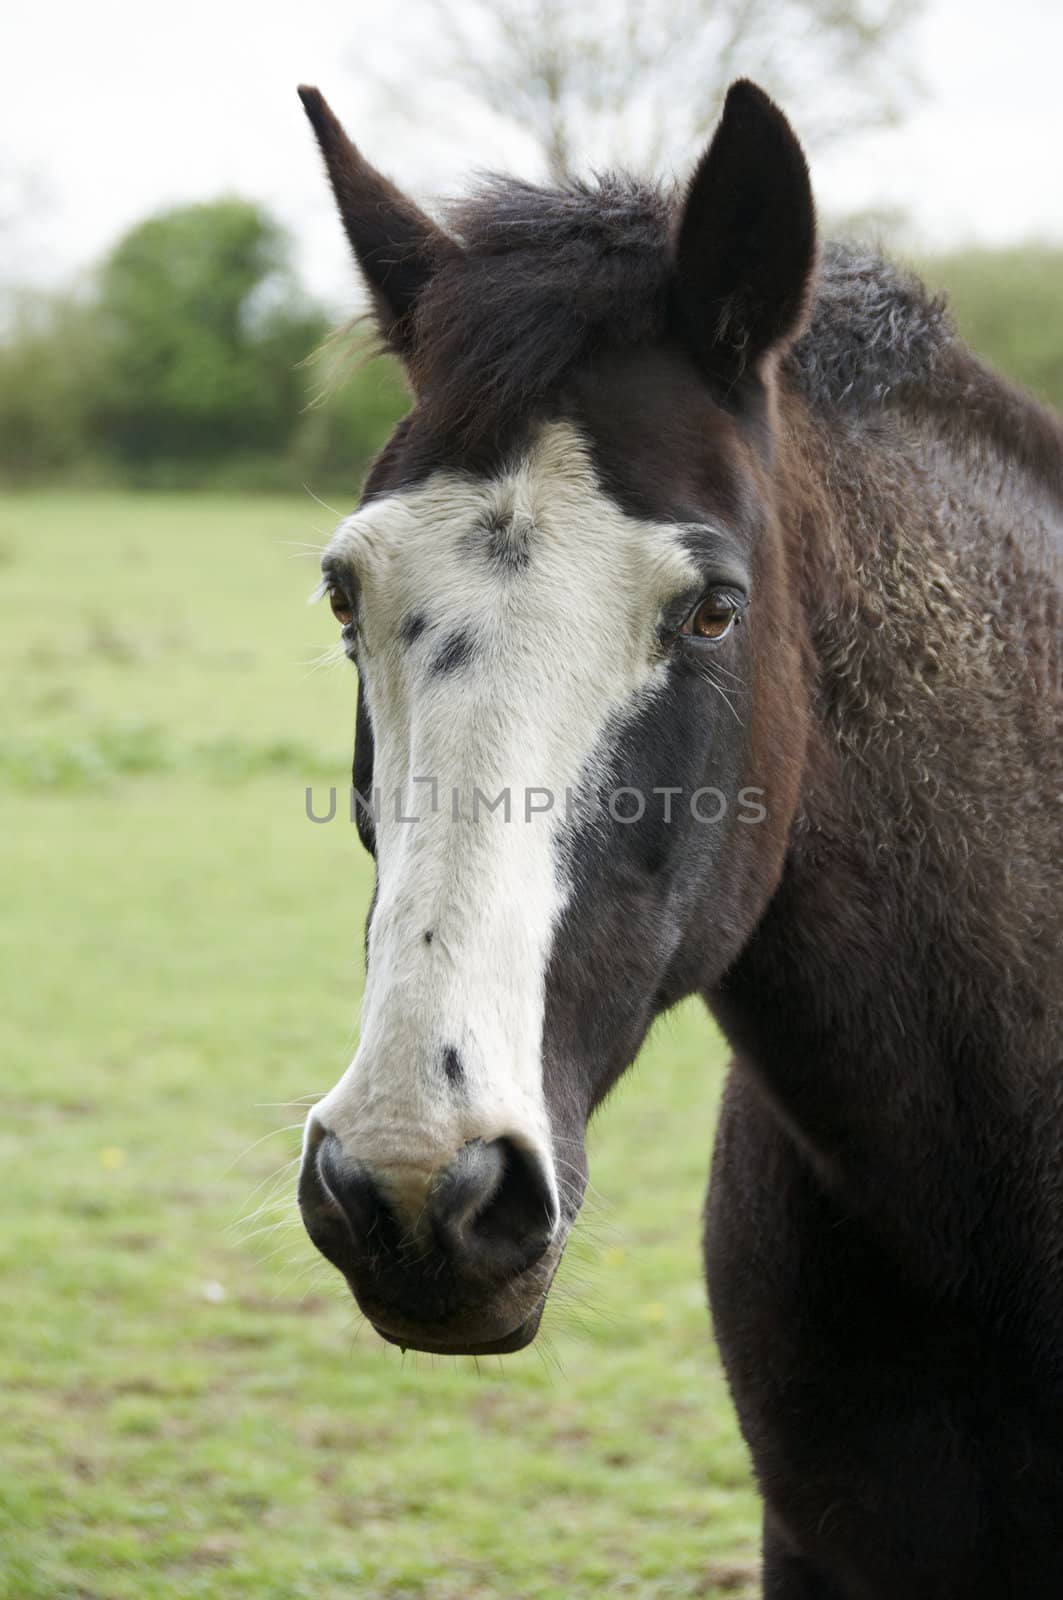 A portrait of a horse in a field